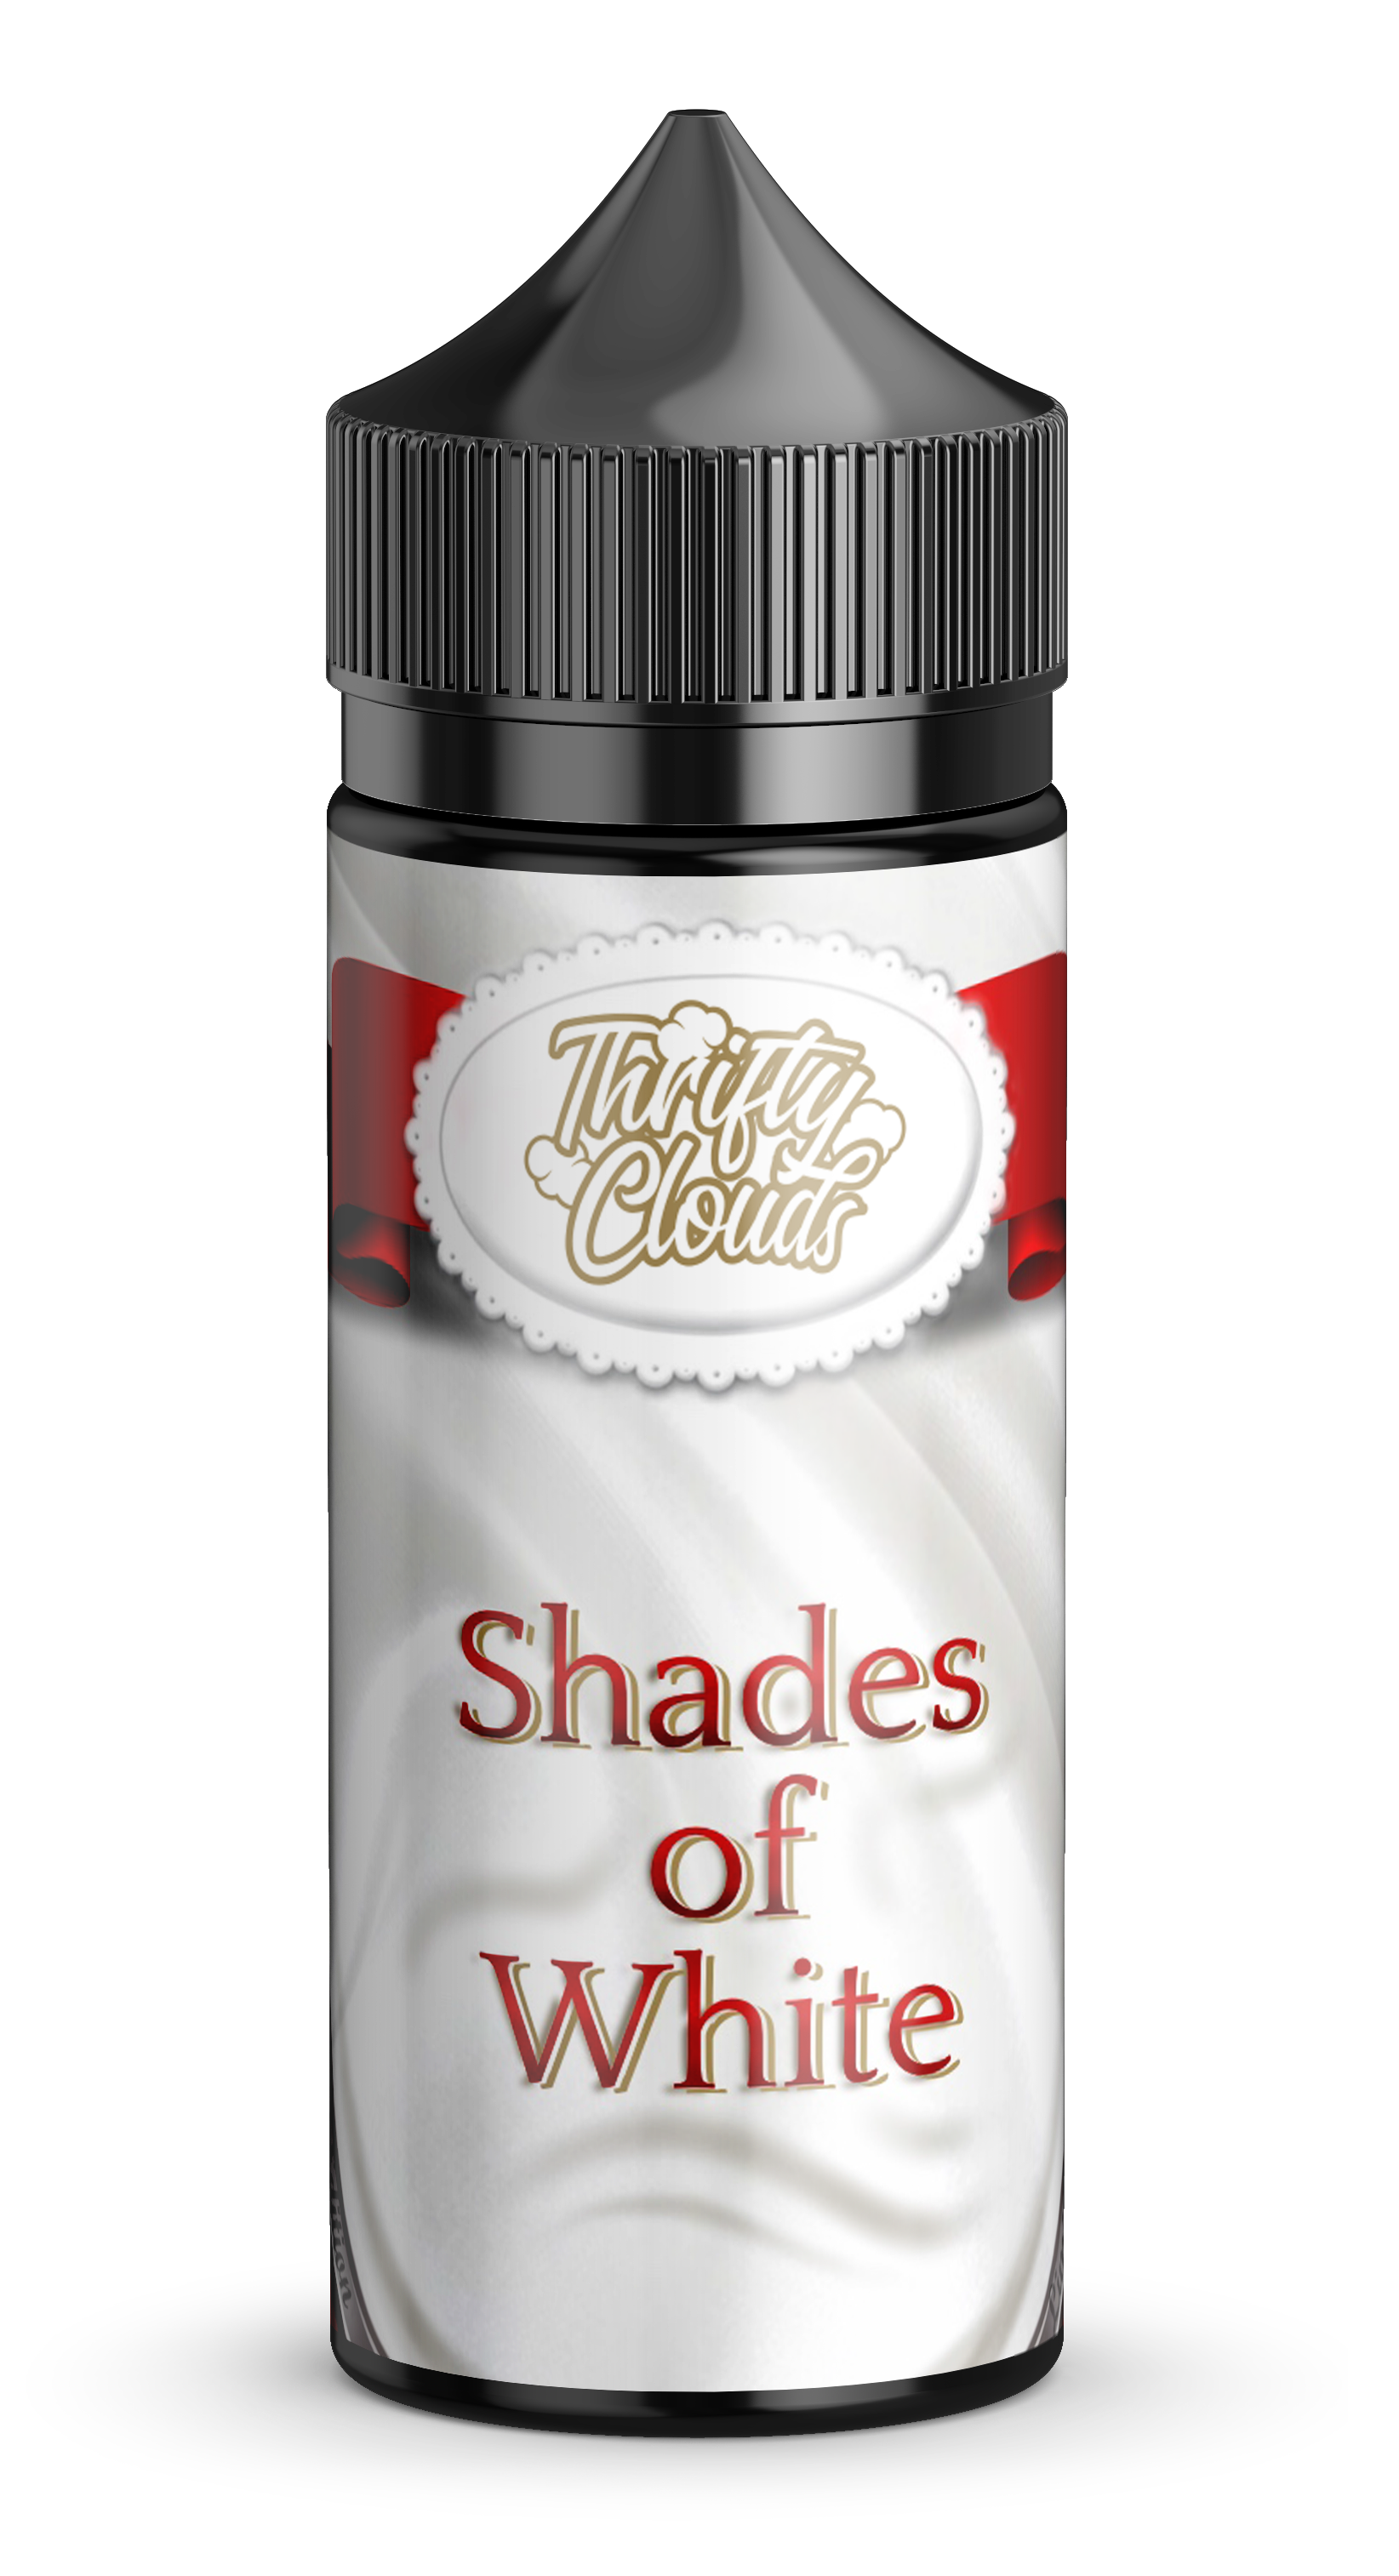 Shades of White by Thrifty Clouds 100ml